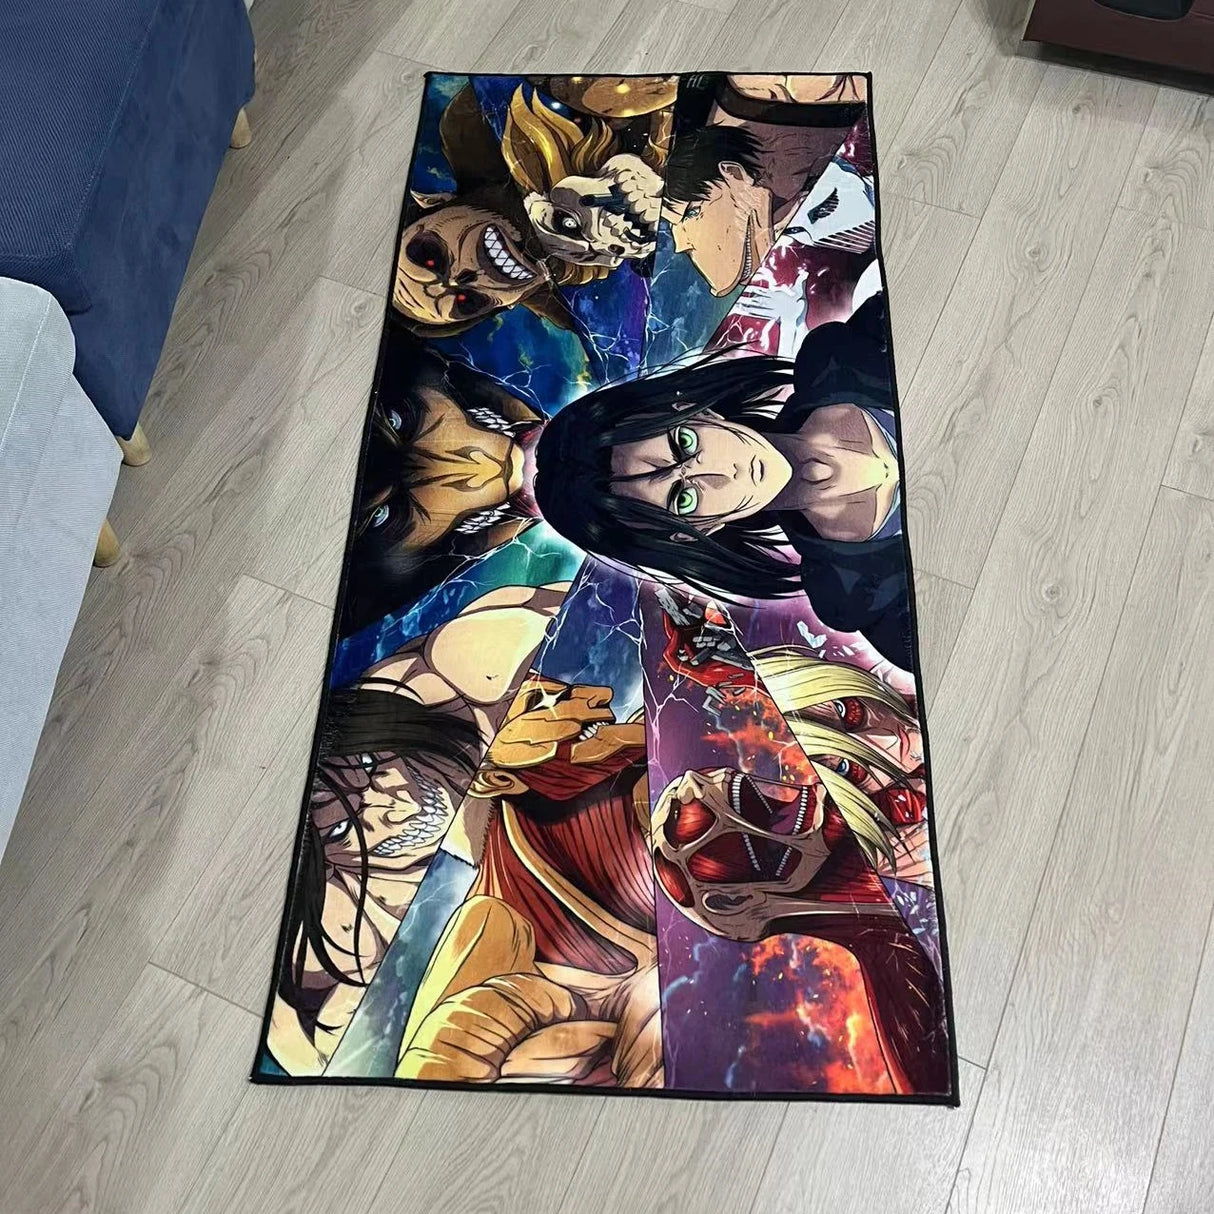 Customize & stay clean your house with our new Eren doormat. | If you are looking for more Knights of the Attack On Titan Merch, We have it all! | Check out all our Anime Merch now!